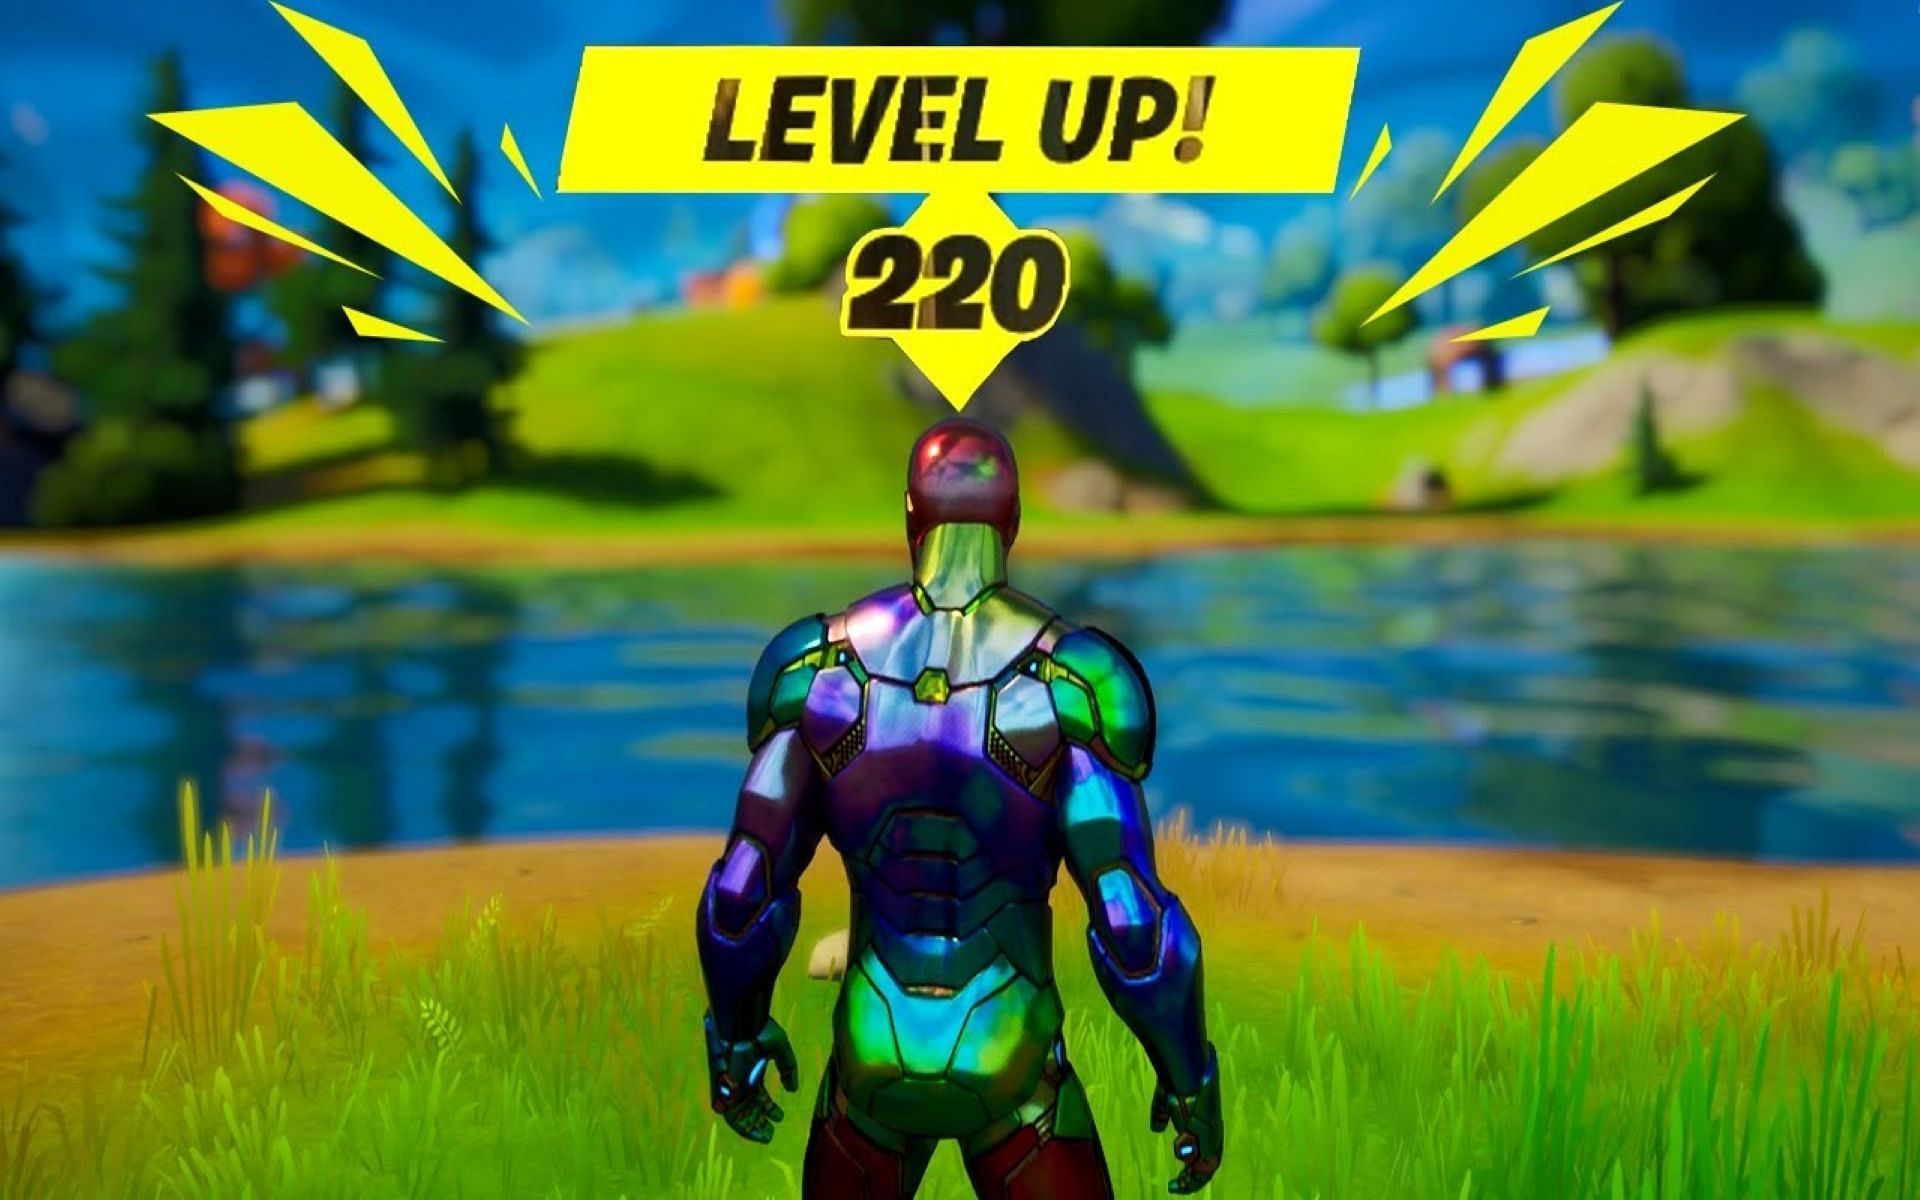 Methods to level up without using challenges in Fortnite (Image via Perfect Score/YouTube)